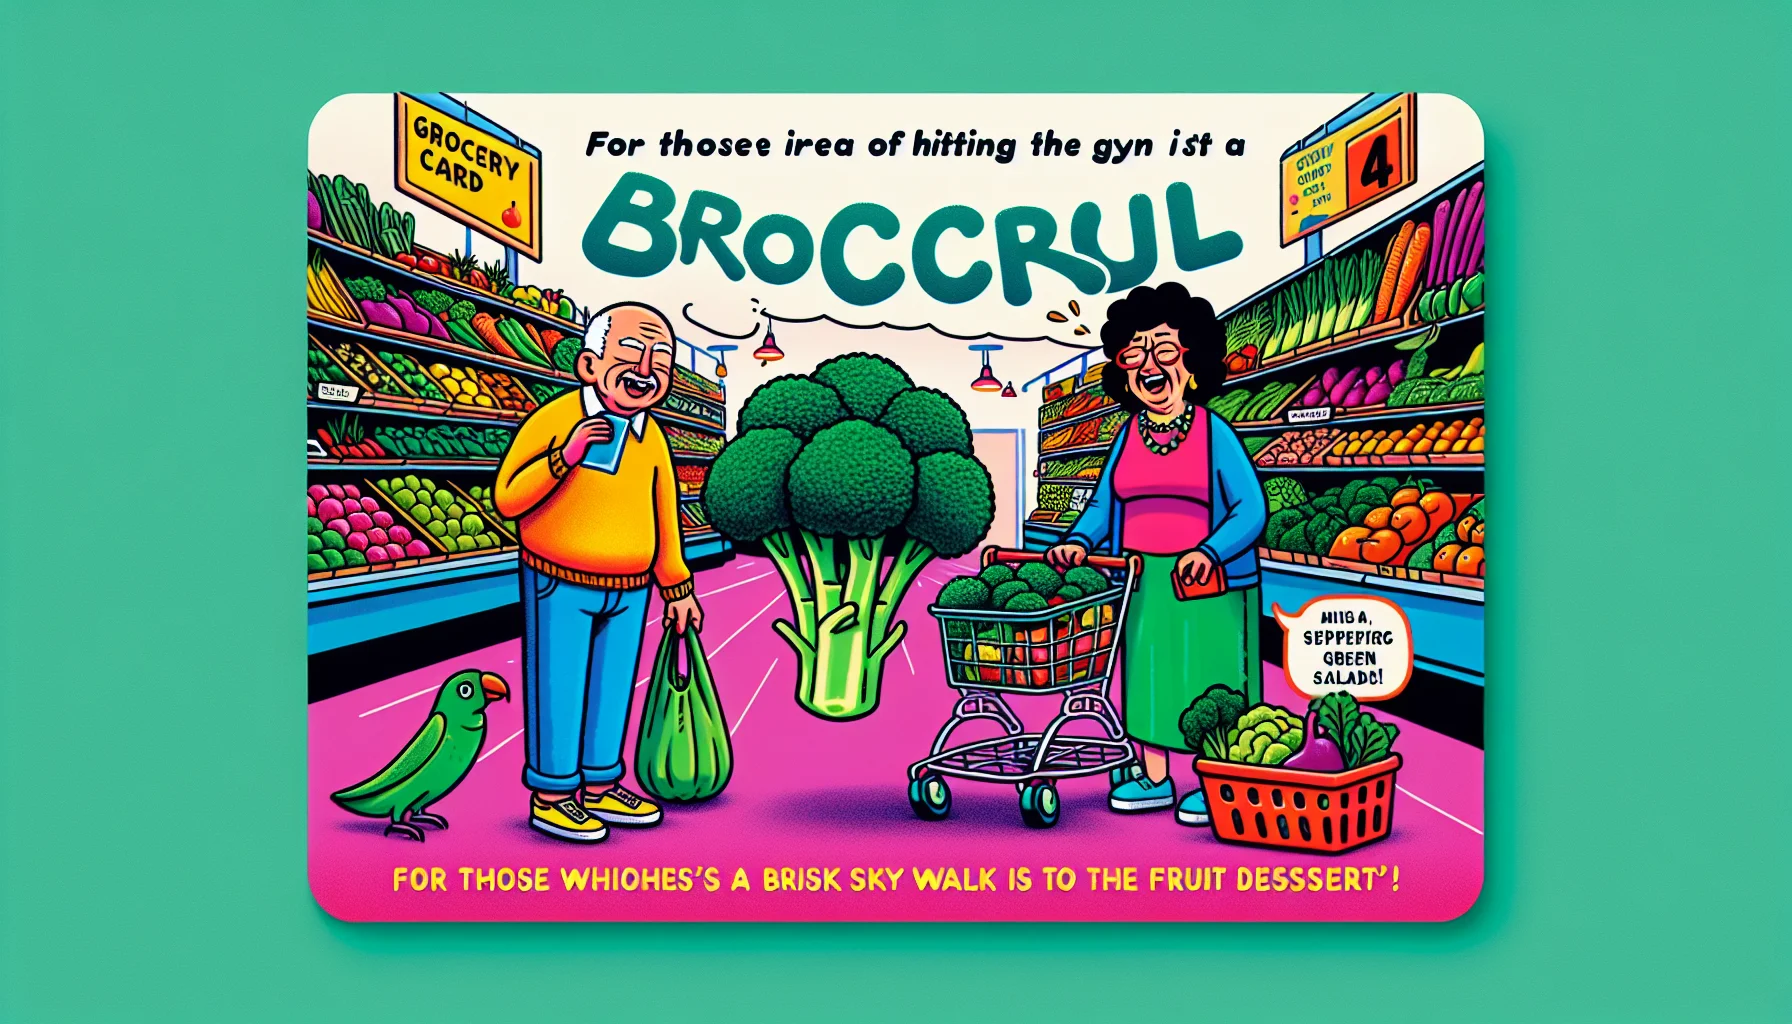 Design an amusing illustration featuring a grocery card intended for seniors. The scene takes place in a vibrant supermarket filled with an assortment of fresh fruits, vegetables and organic produce. The key characters are an elderly East Asian gentleman in colorful casual clothing, misreading the label on a broccoli thinking it's a dessert, and a Middle Eastern aged woman laughing while holding a basket full of green salads. The grocery card itself should be humorously oversized, with a funny tagline: 'For those whose idea of hitting the gym is a brisk walk to the fruit section!'. And perhaps, a confused parrot eyed the broccoli with suspicion.